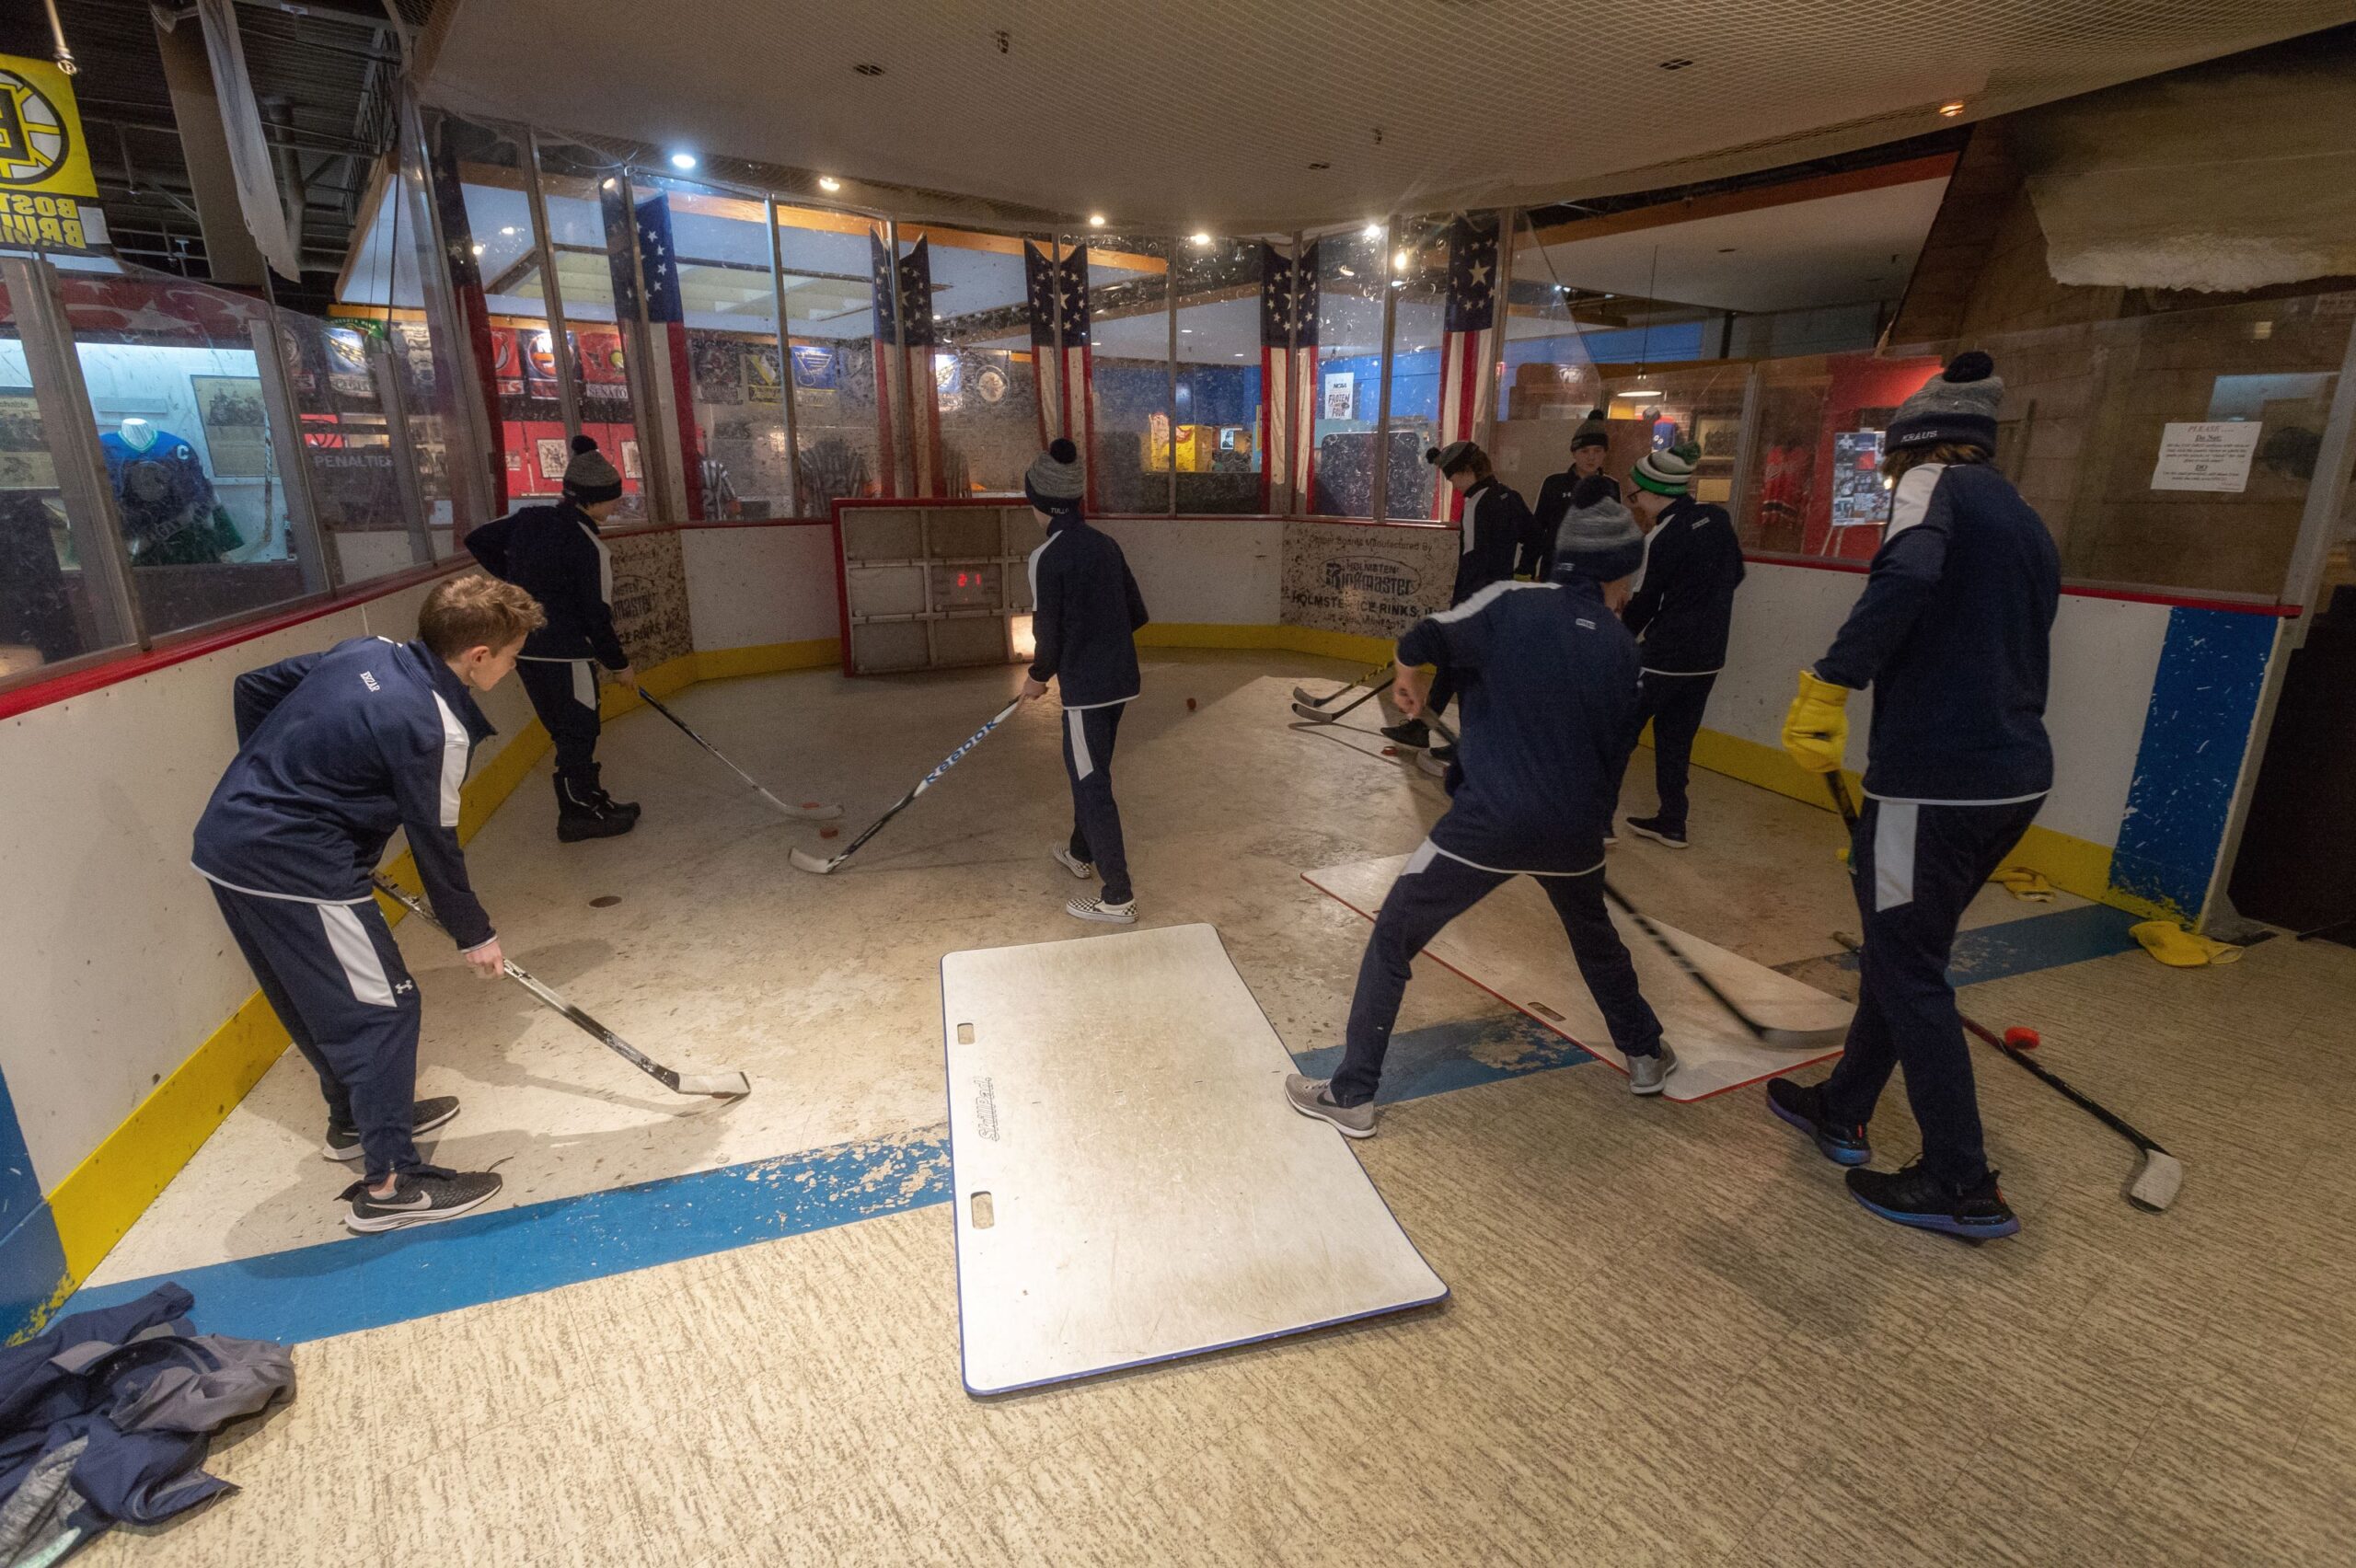 Young people hit hockey pucks in an exhibit at the US Hockey Hall of Fame Museum